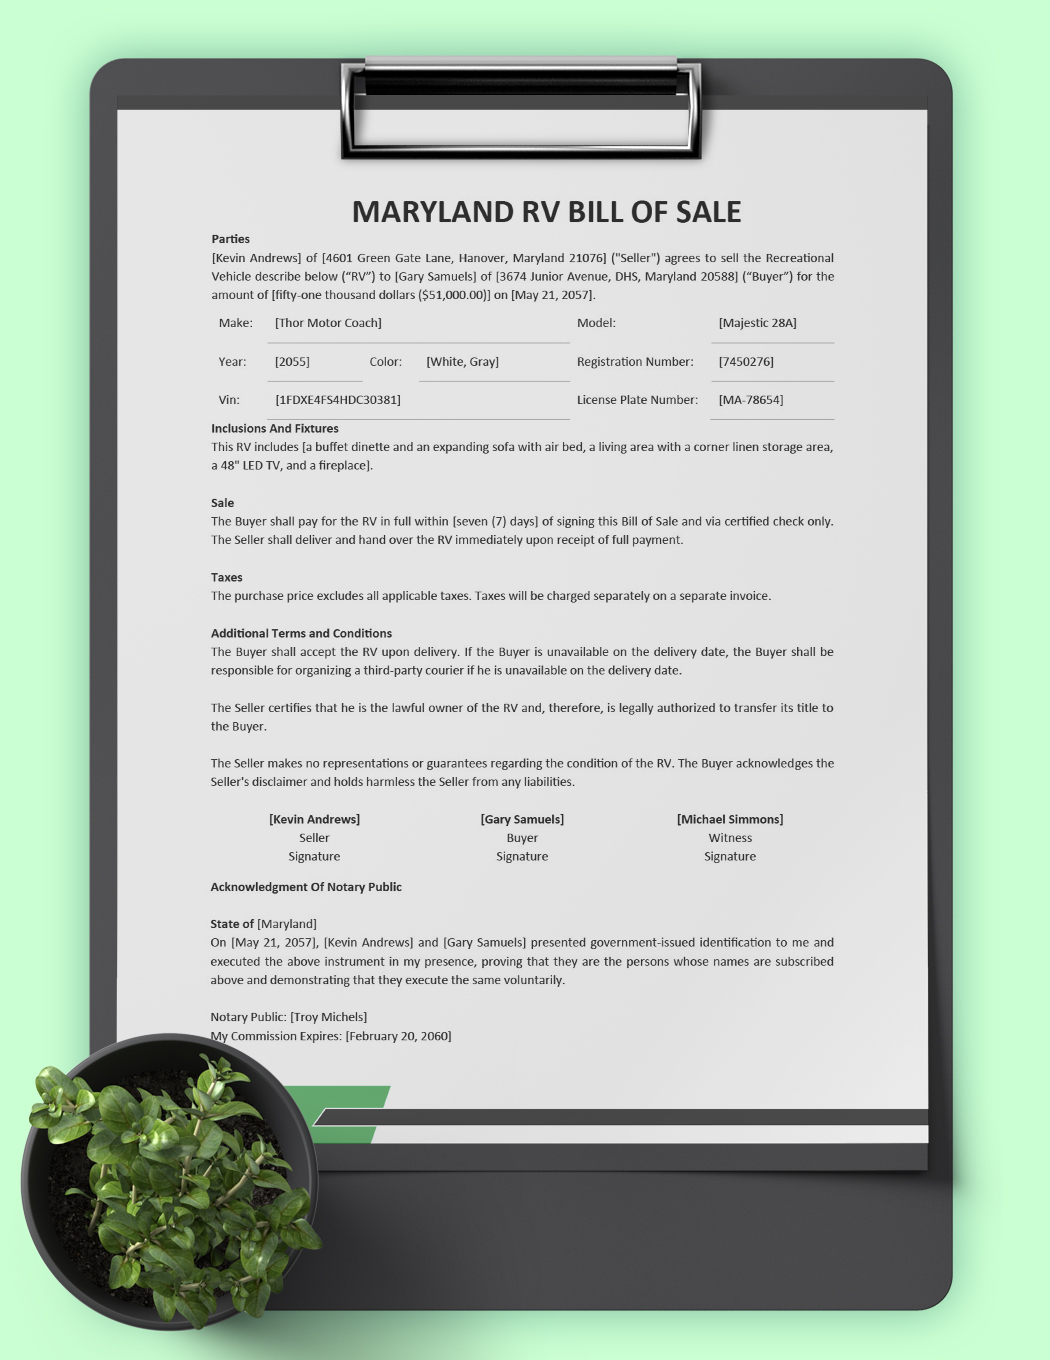 Maryland RV Bill of Sale Template